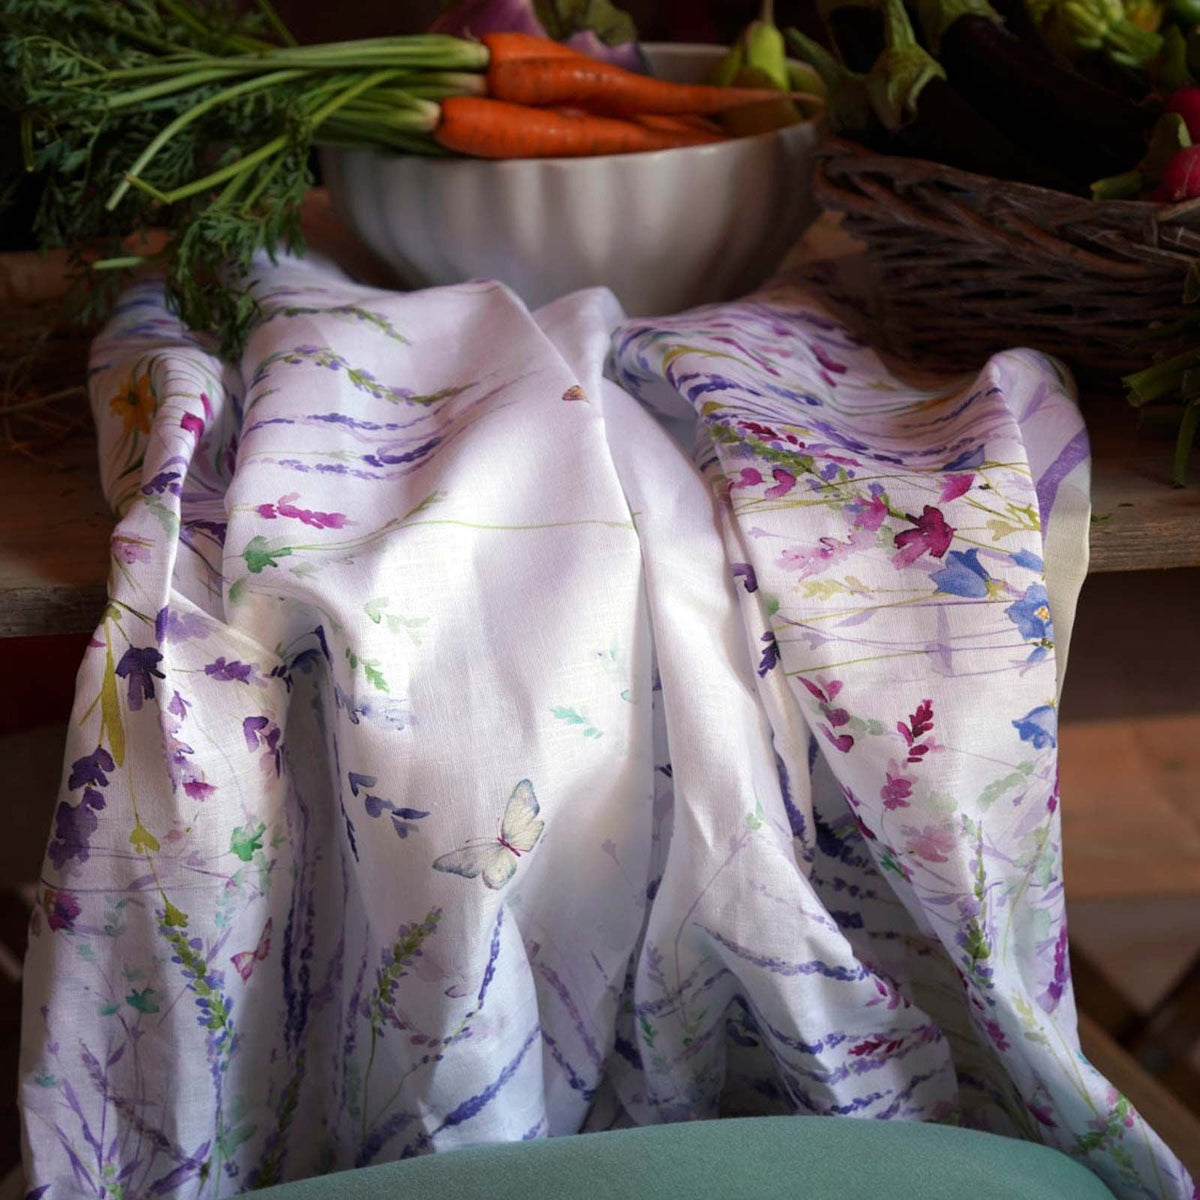 Meadow Tablecloth featuring delicate floral watercolors with butterflies in shades of purple,green, and blue on Italian linen from Caskata